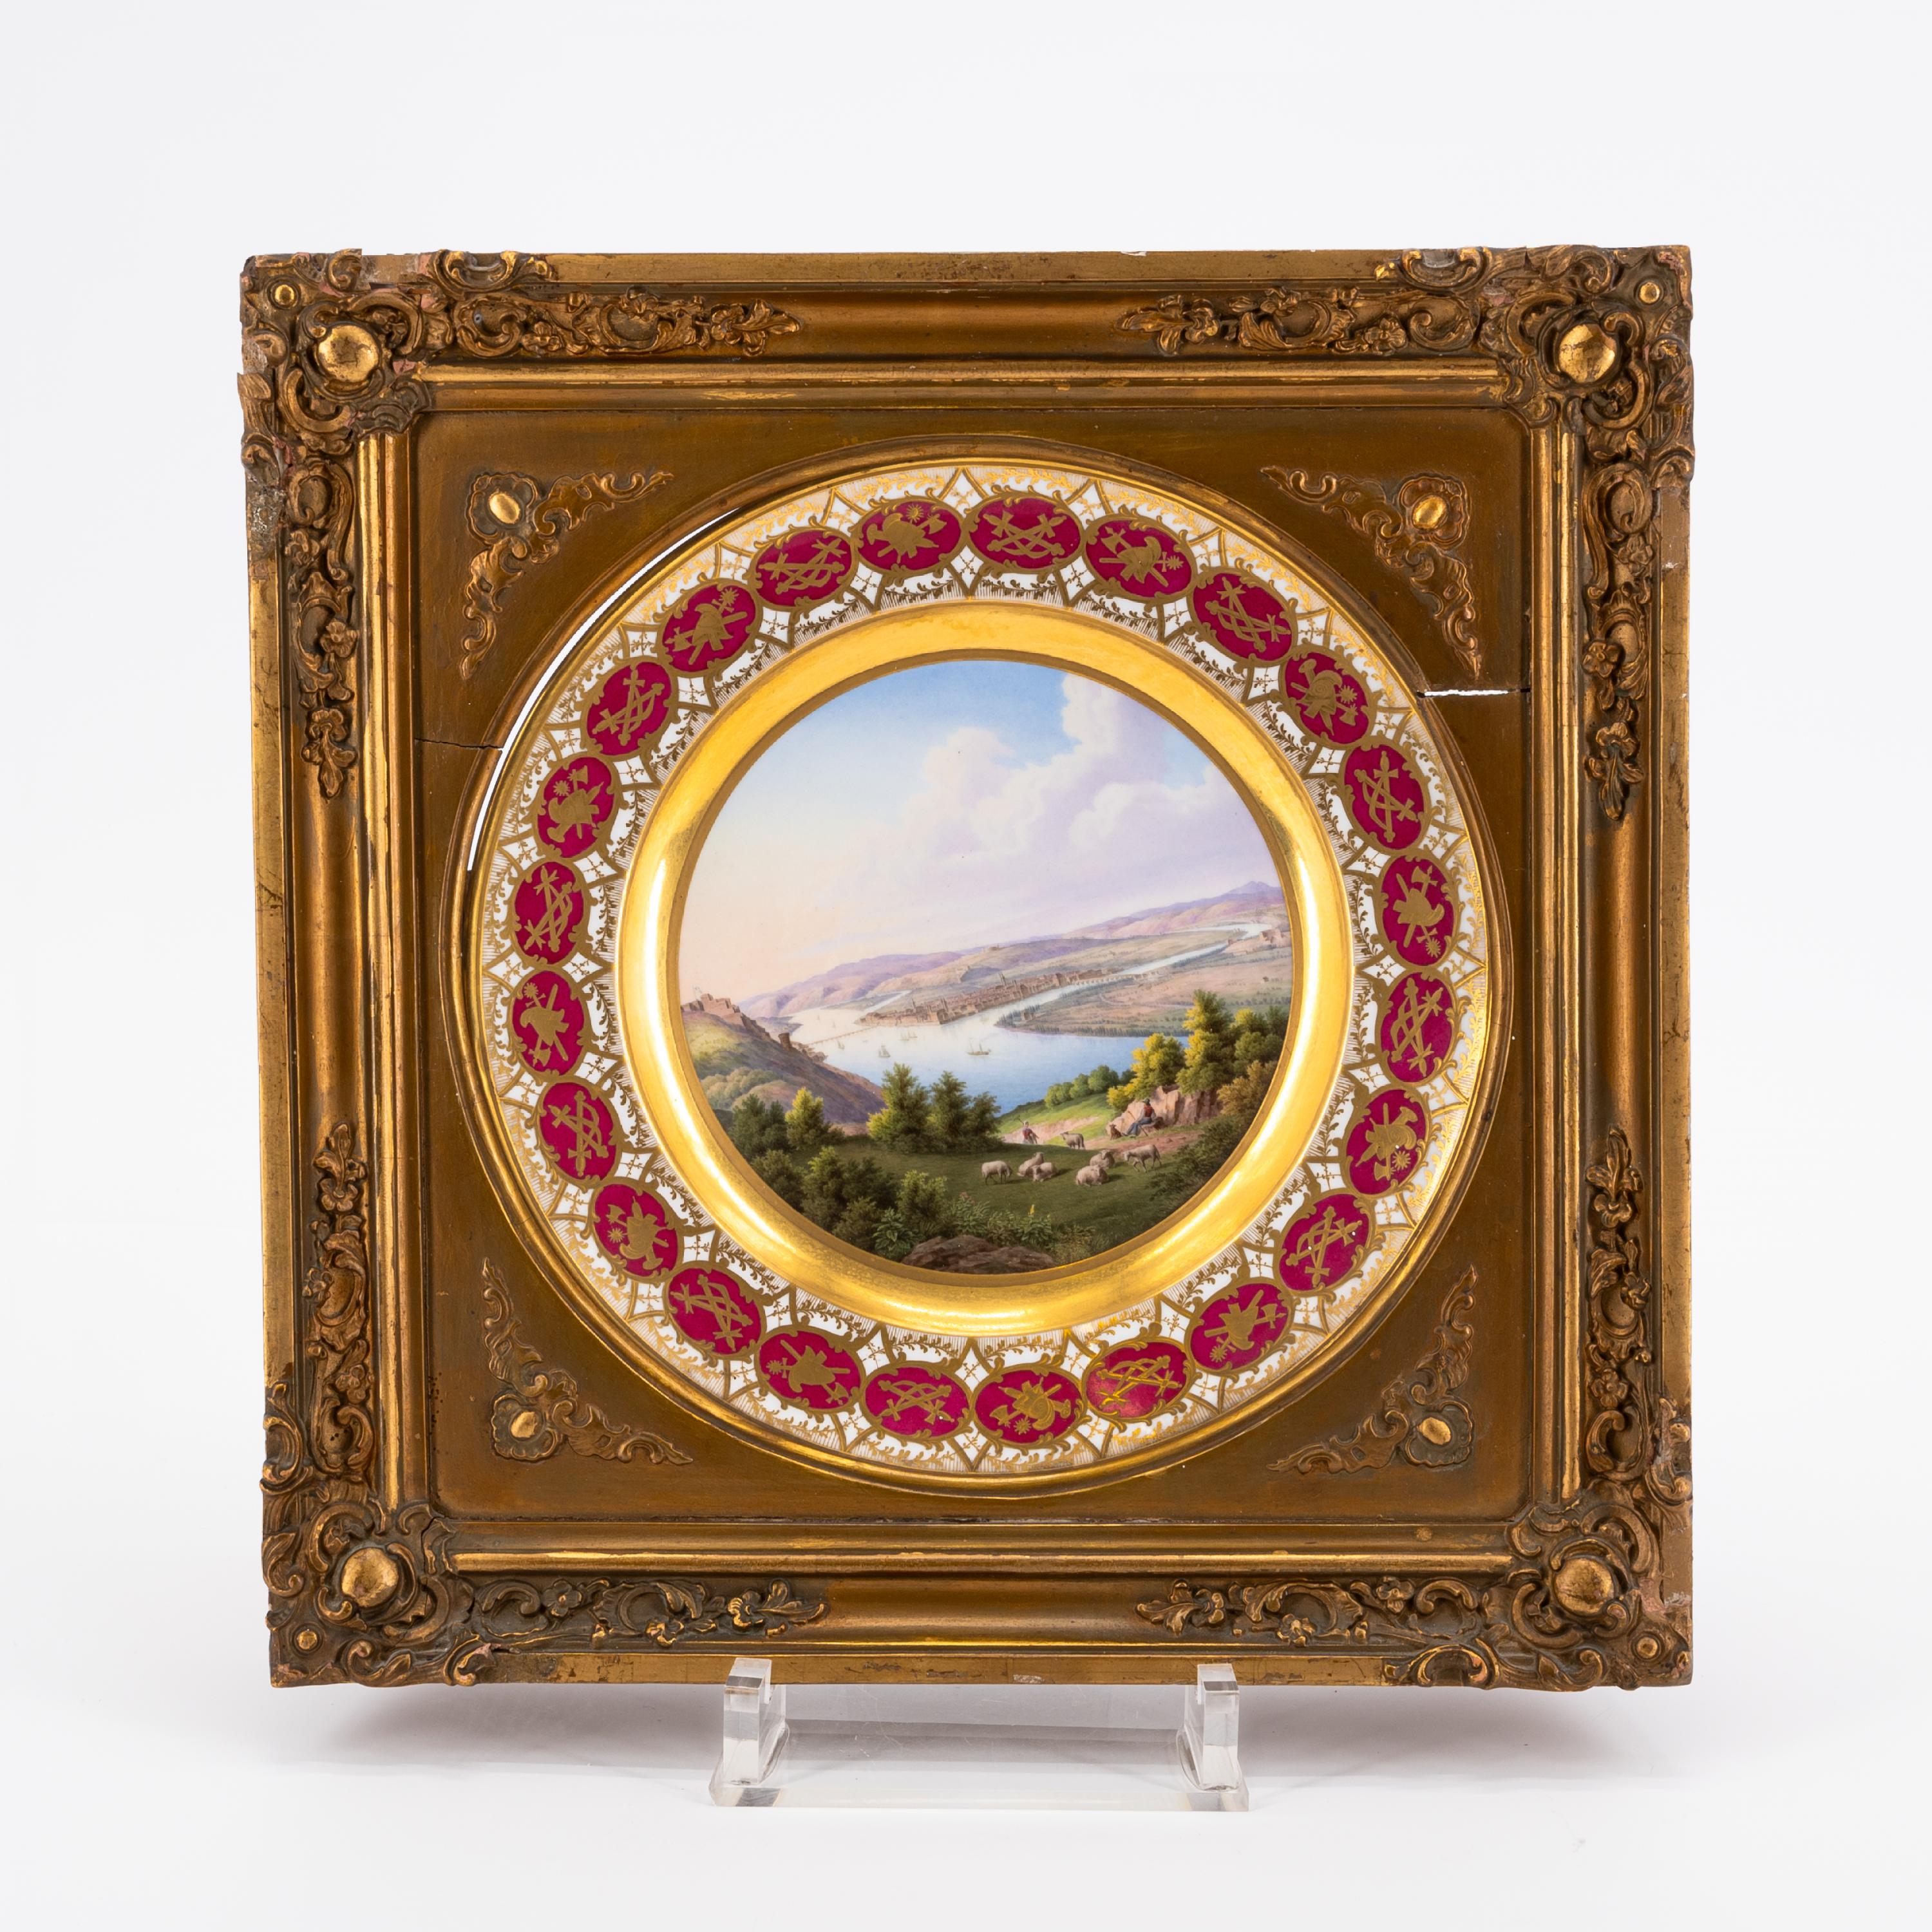 EXEPTIONAL SERIES OF TWELVE PORCELAIN PLATES WITH ROMANTIC VIEWS OF THE RHINE - Image 9 of 26